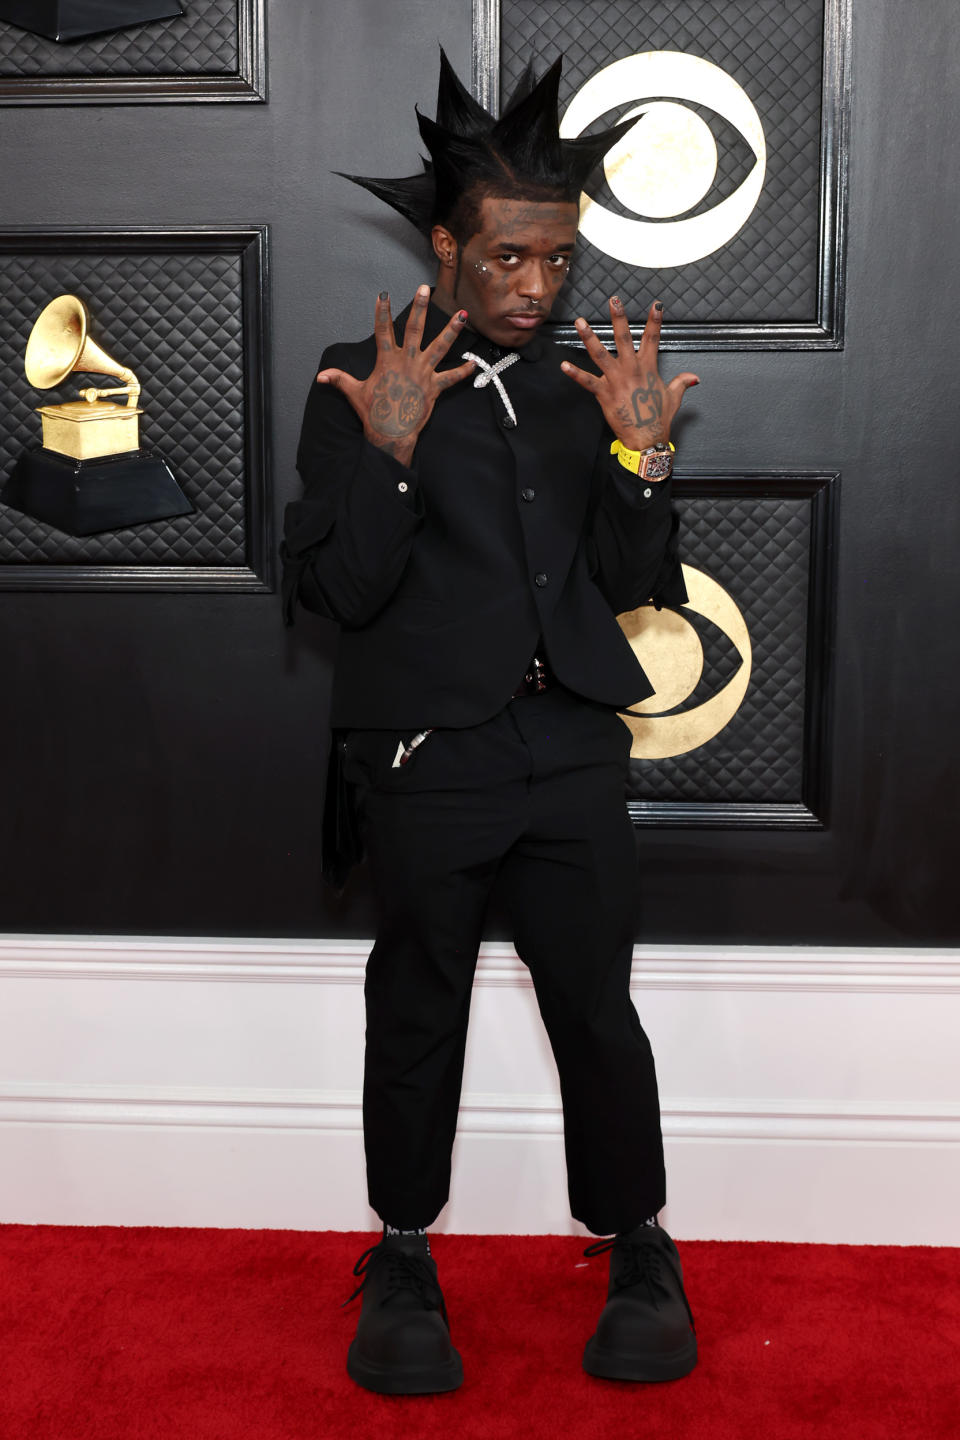 LOS ANGELES, CALIFORNIA - FEBRUARY 05: (FOR EDITORIAL USE ONLY) Lil Uzi Vert attends the 65th GRAMMY Awards on February 05, 2023 in Los Angeles, California. (Photo by Amy Sussman/Getty Images)